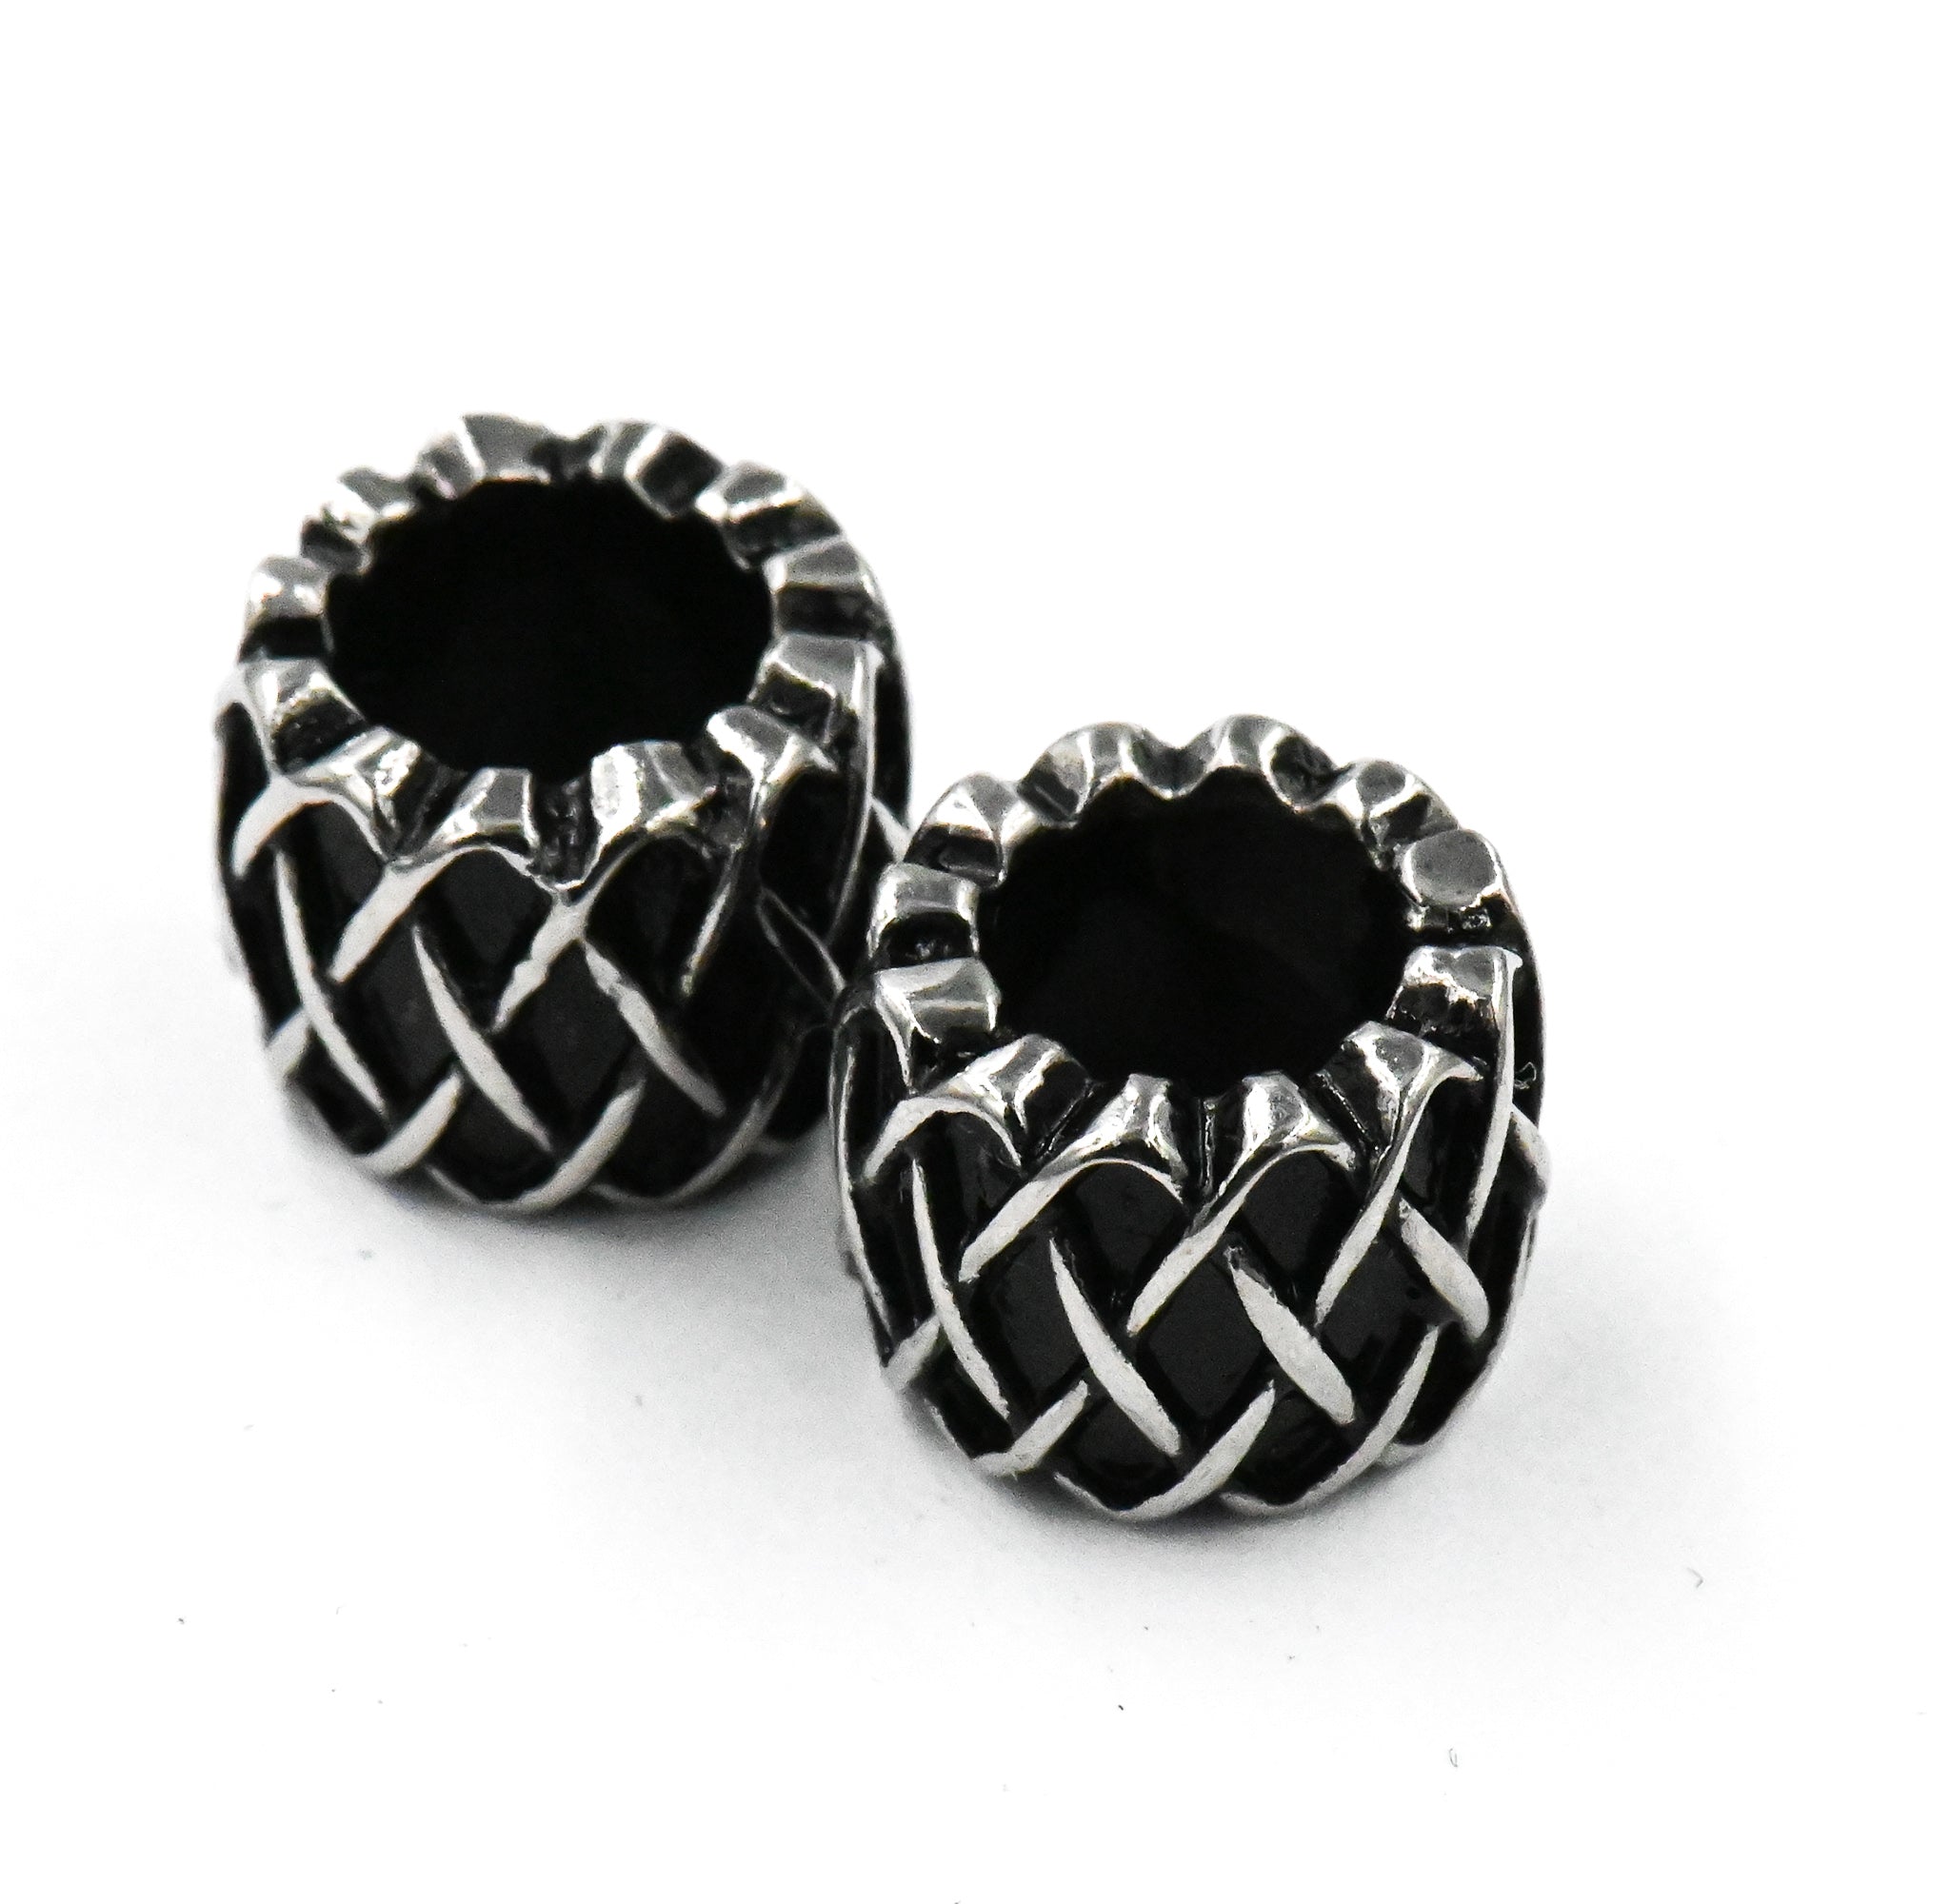 Stainless Steel Beads, 1pc, Retro Weave Pattern Large Hole Beads, 10.5x7.5mm Antique Silver